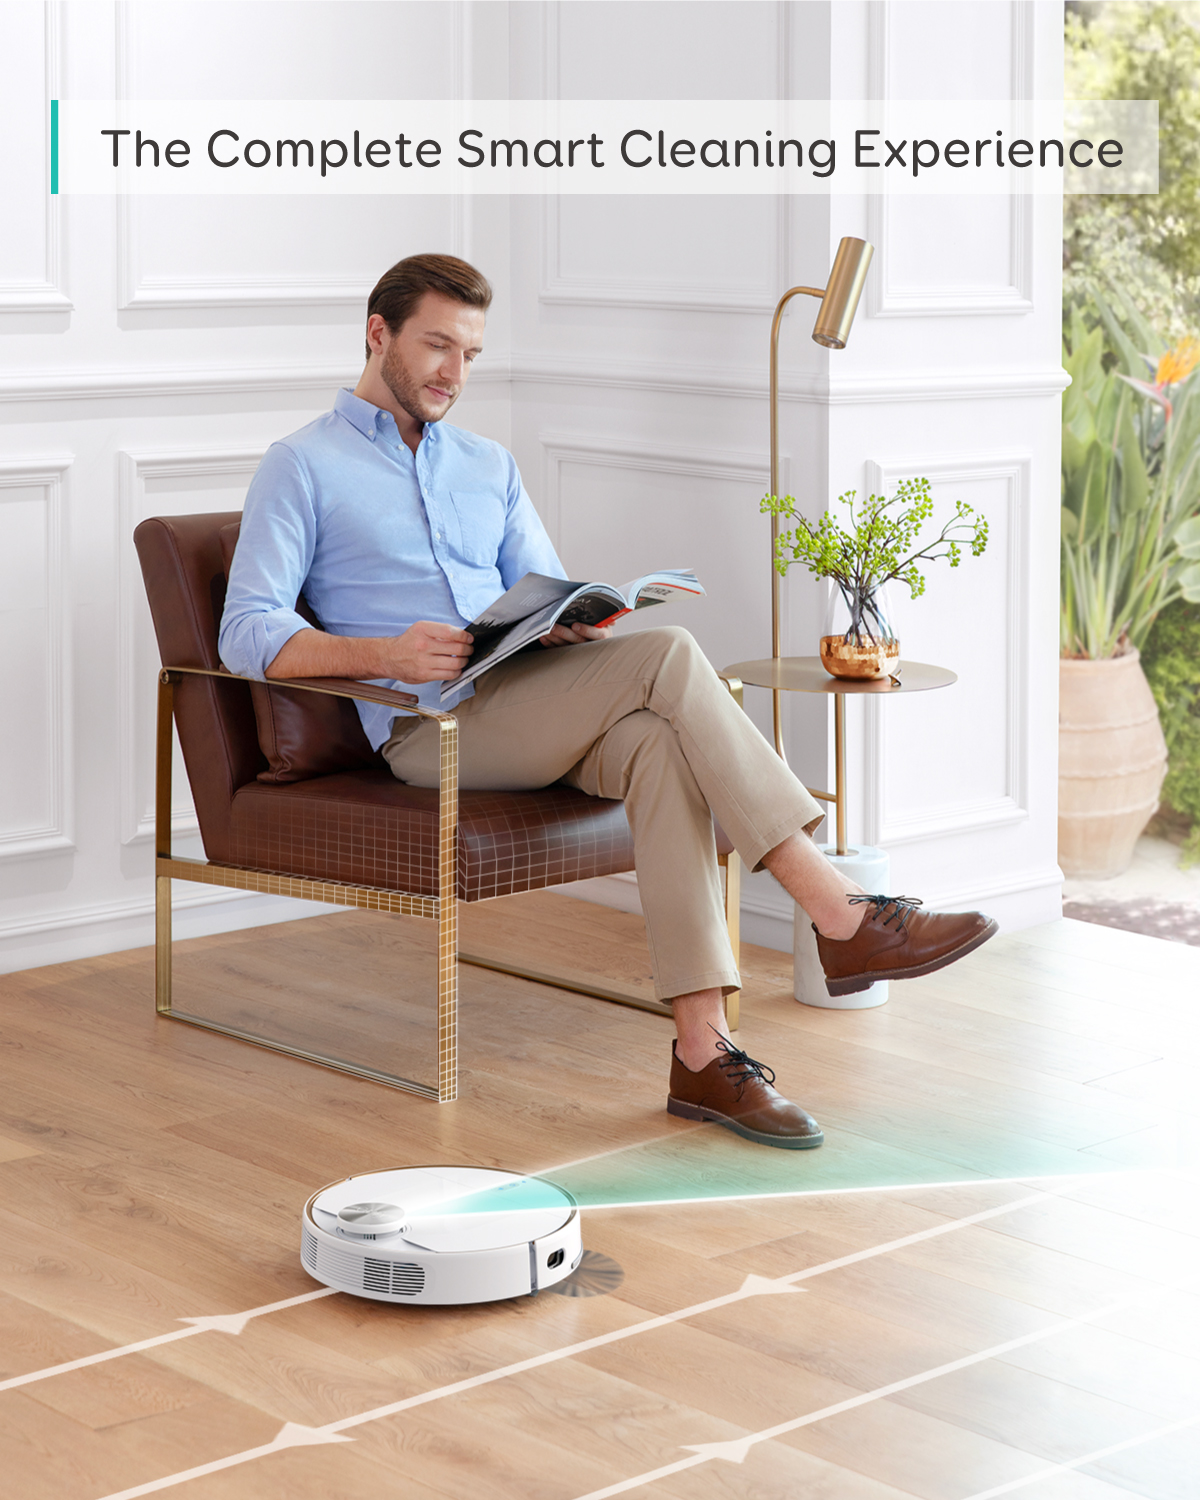 Anker eufy L70 Hybrid Robot 2-in-1 Vacuum and Mop - image 2 of 6